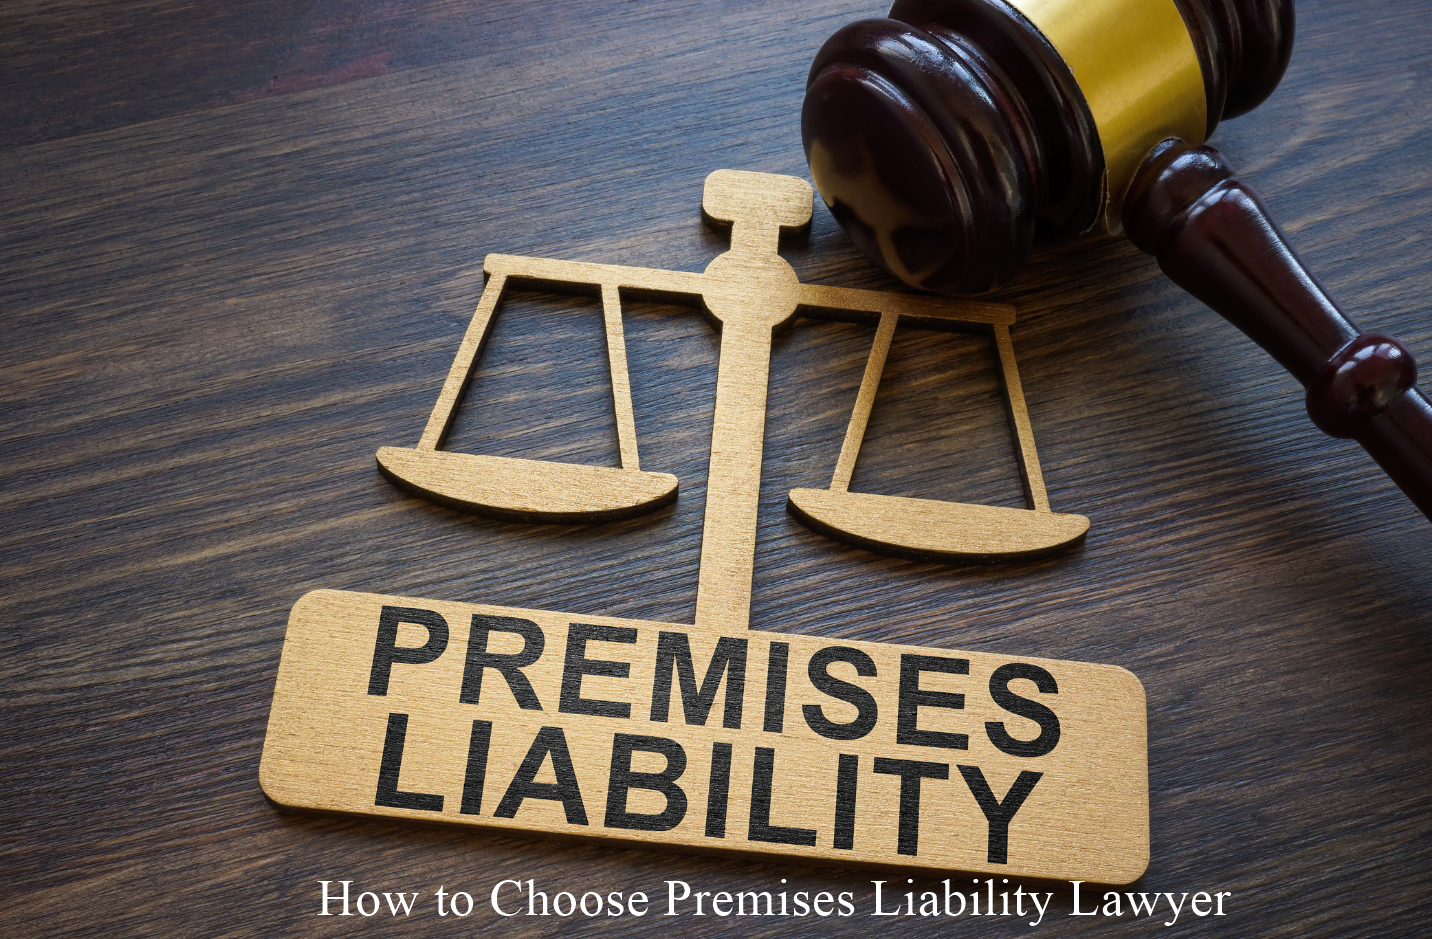 How to Choose Premises Liability Lawyer